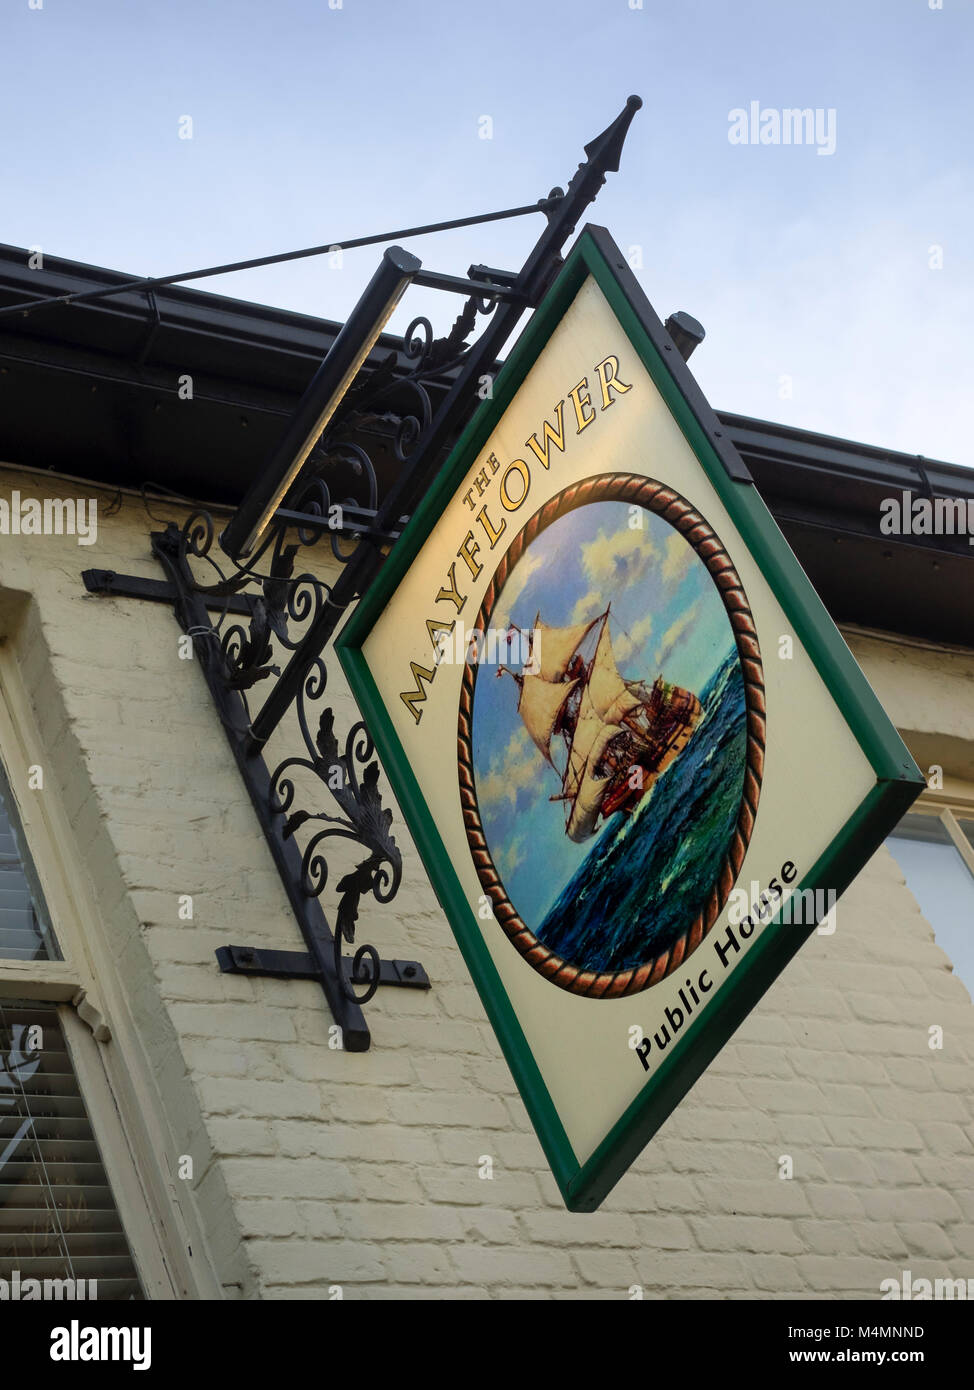 LEIGH-ON-SEA, ESSEX, UK - FEBRUARY 16, 2018:   sign above The Mayflower Pub at Old Leigh Stock Photo